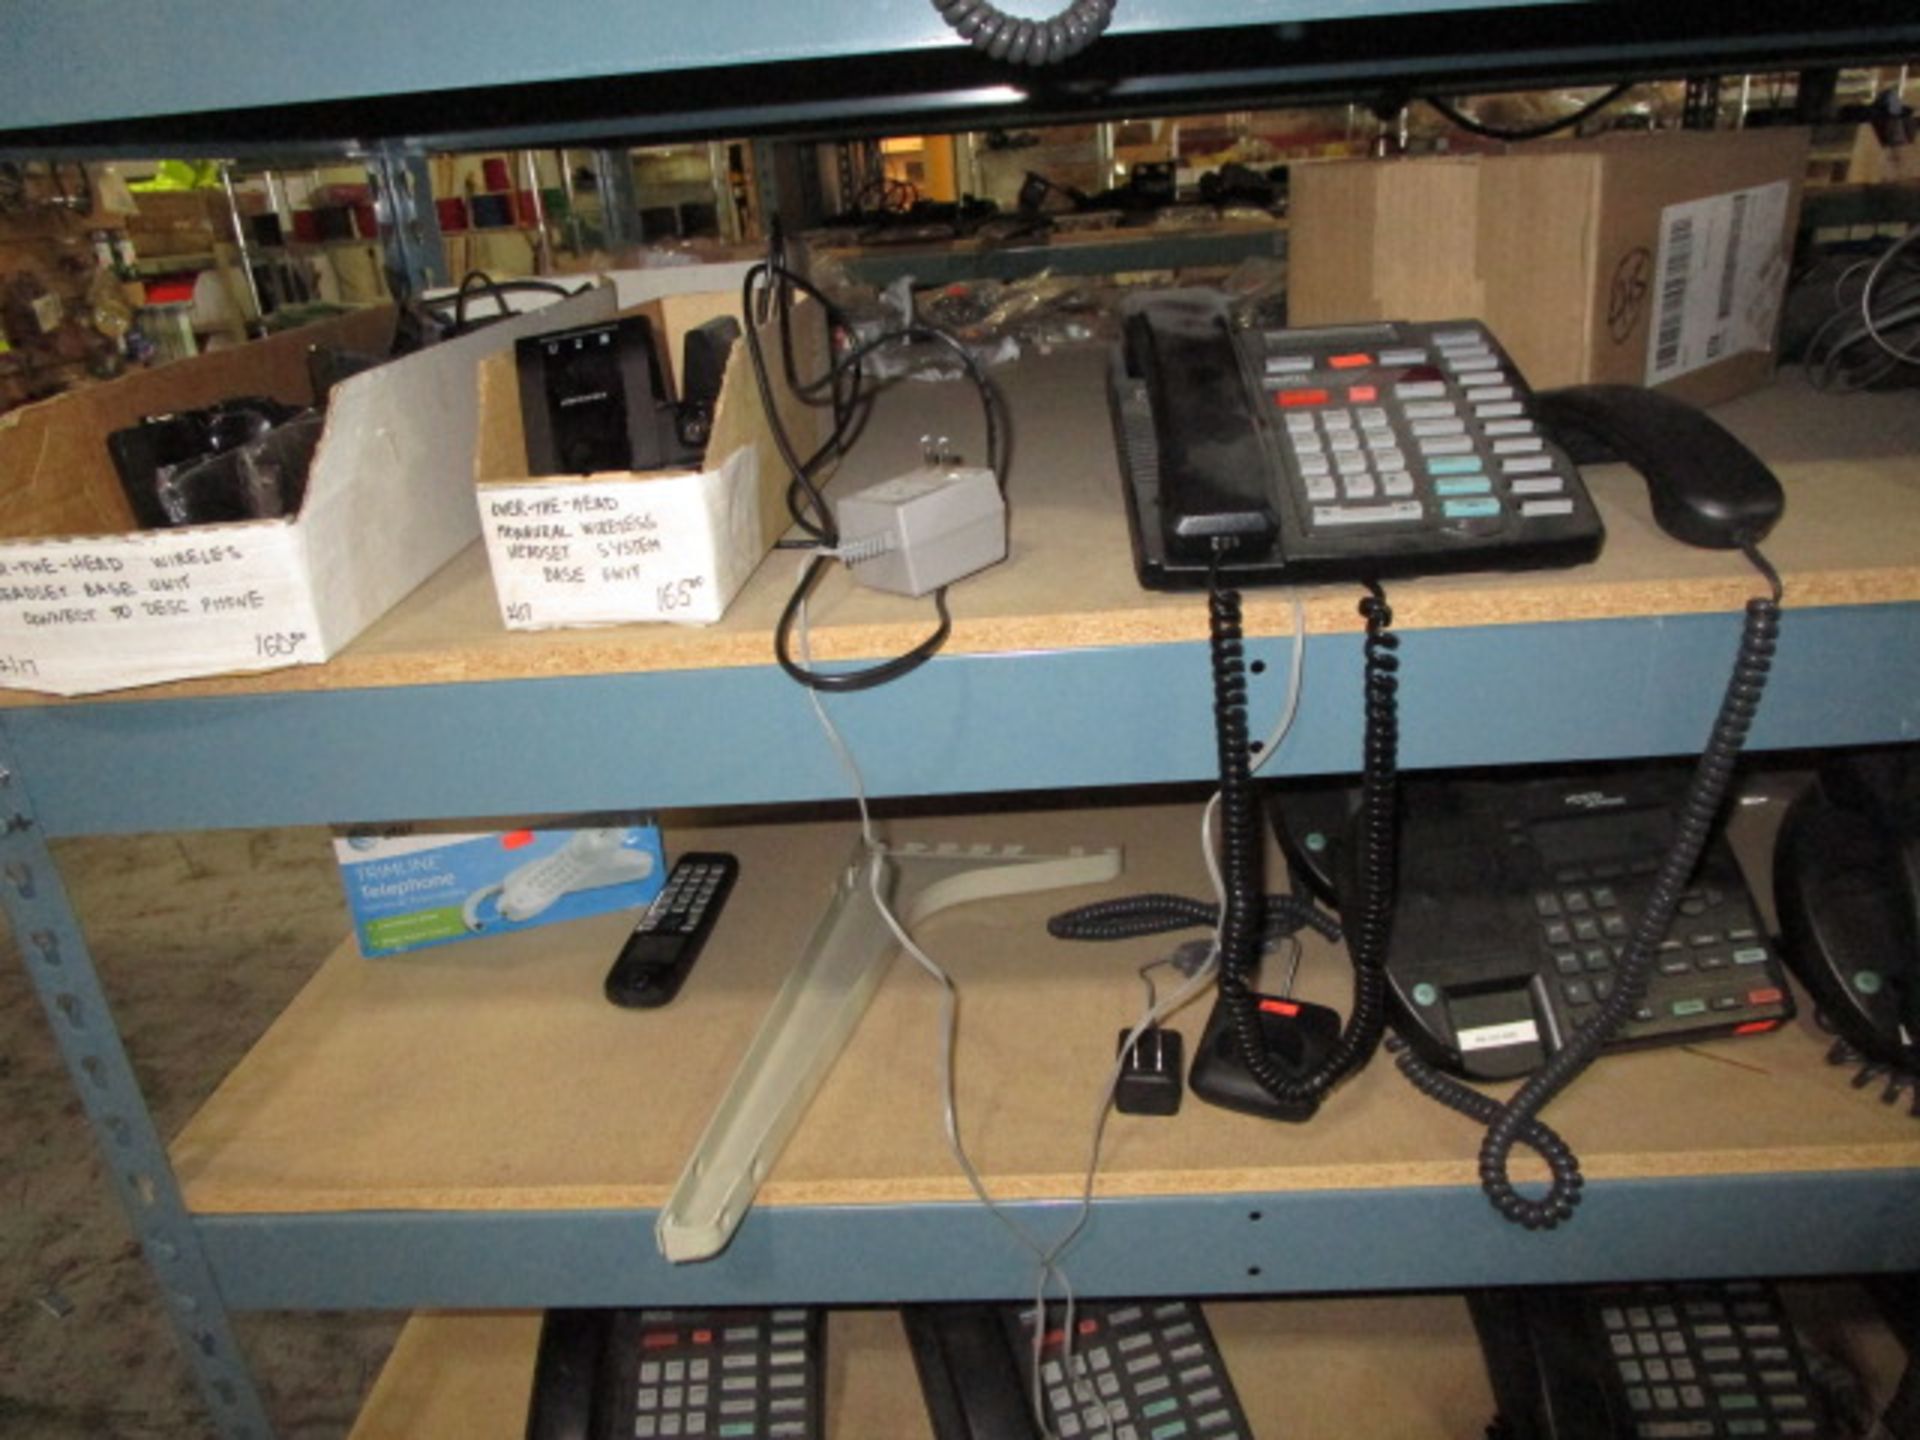 SHELVING UNIT OF ASSORTMENT OF BINDERS AND OFFICE PHONES - Image 6 of 10